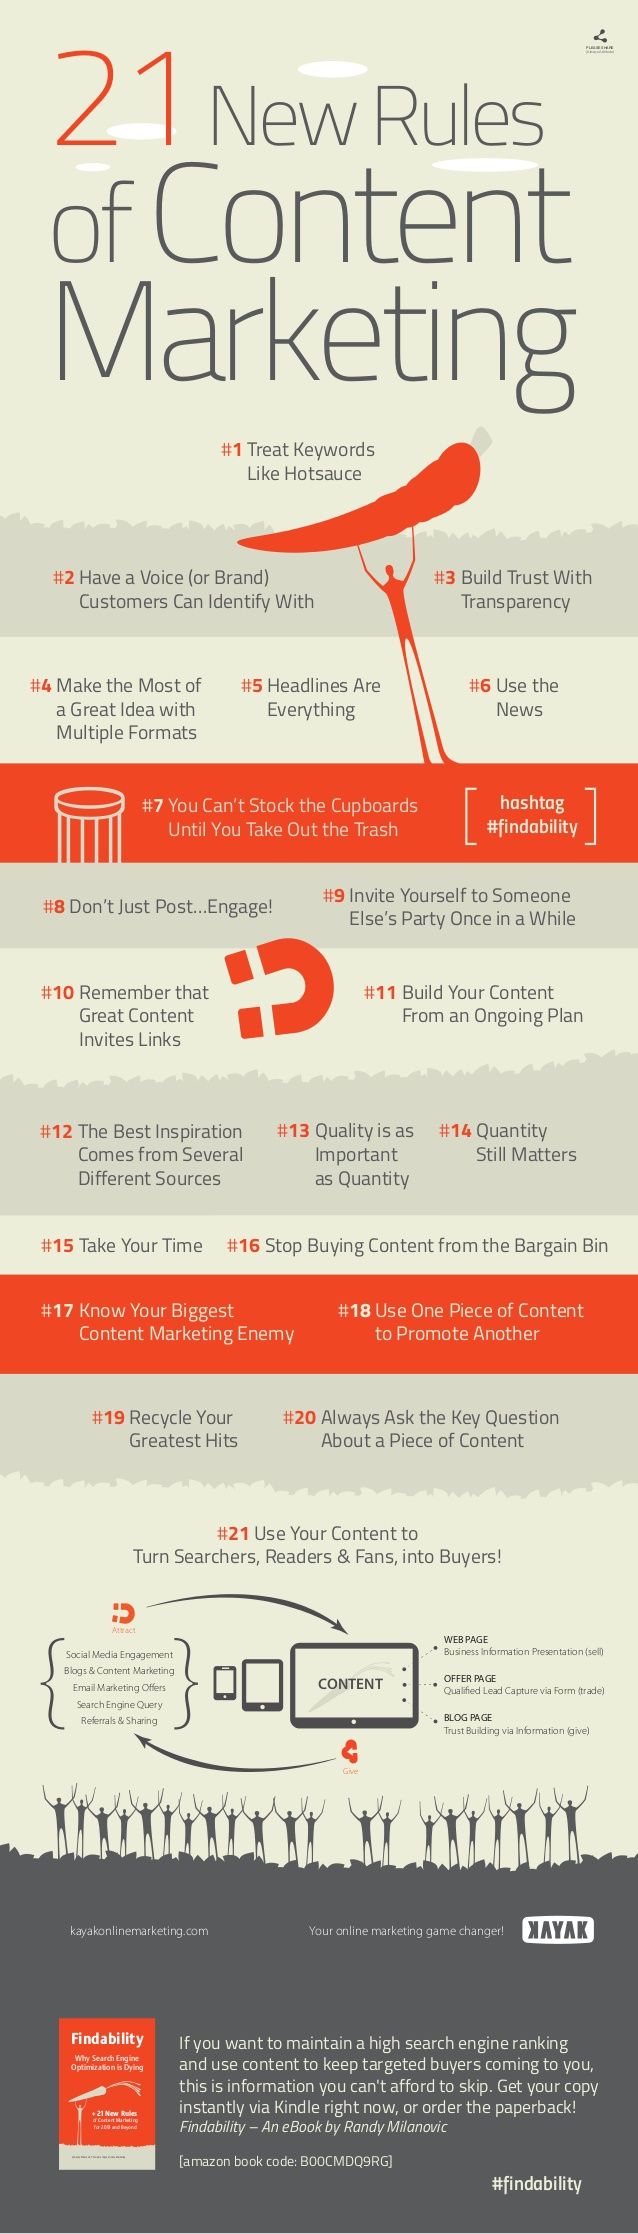 Infografia - The 21 new rules of content marketing infographic.